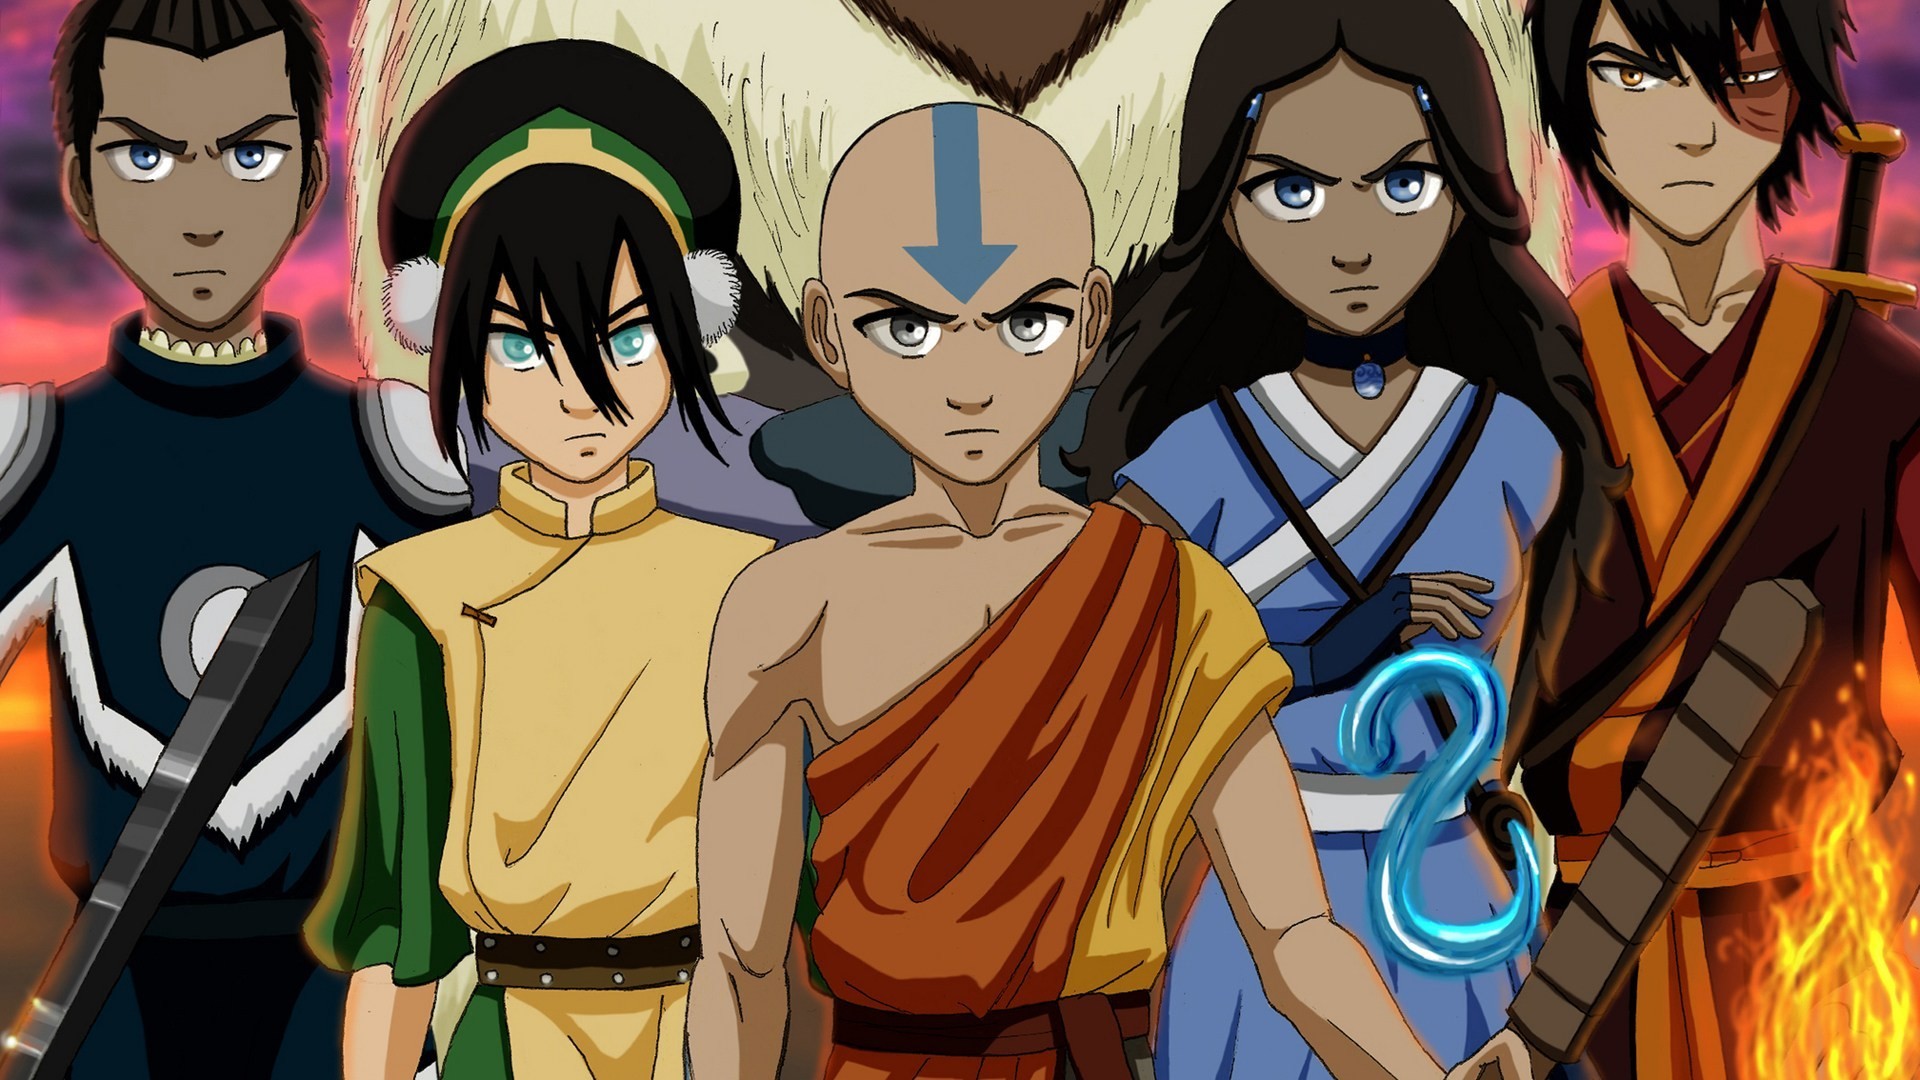 1920x1080 Nickelodeon Avatar: The Last Airbender All Characters 1080p HD Wallpaper  Background